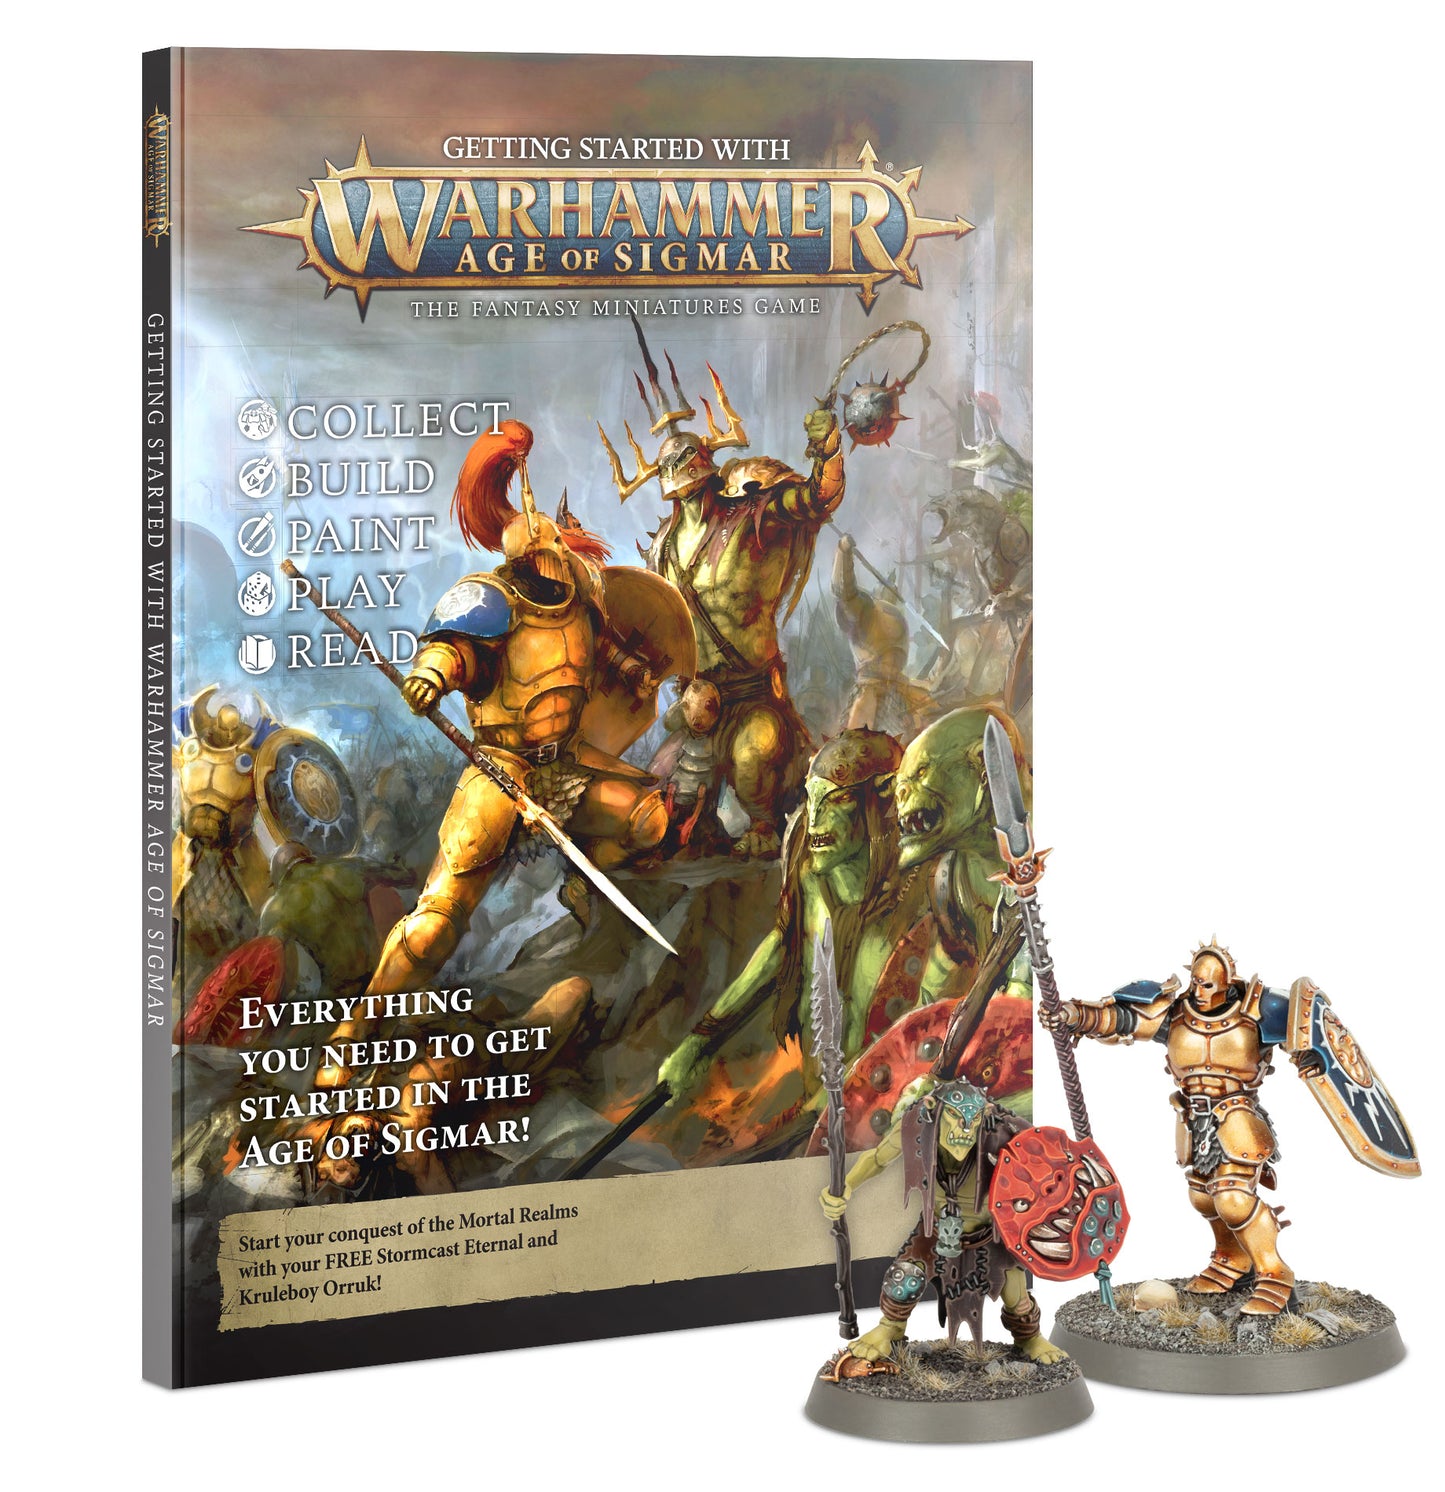 Getting Started with Age of Sigmar - Command Elite Hobbies